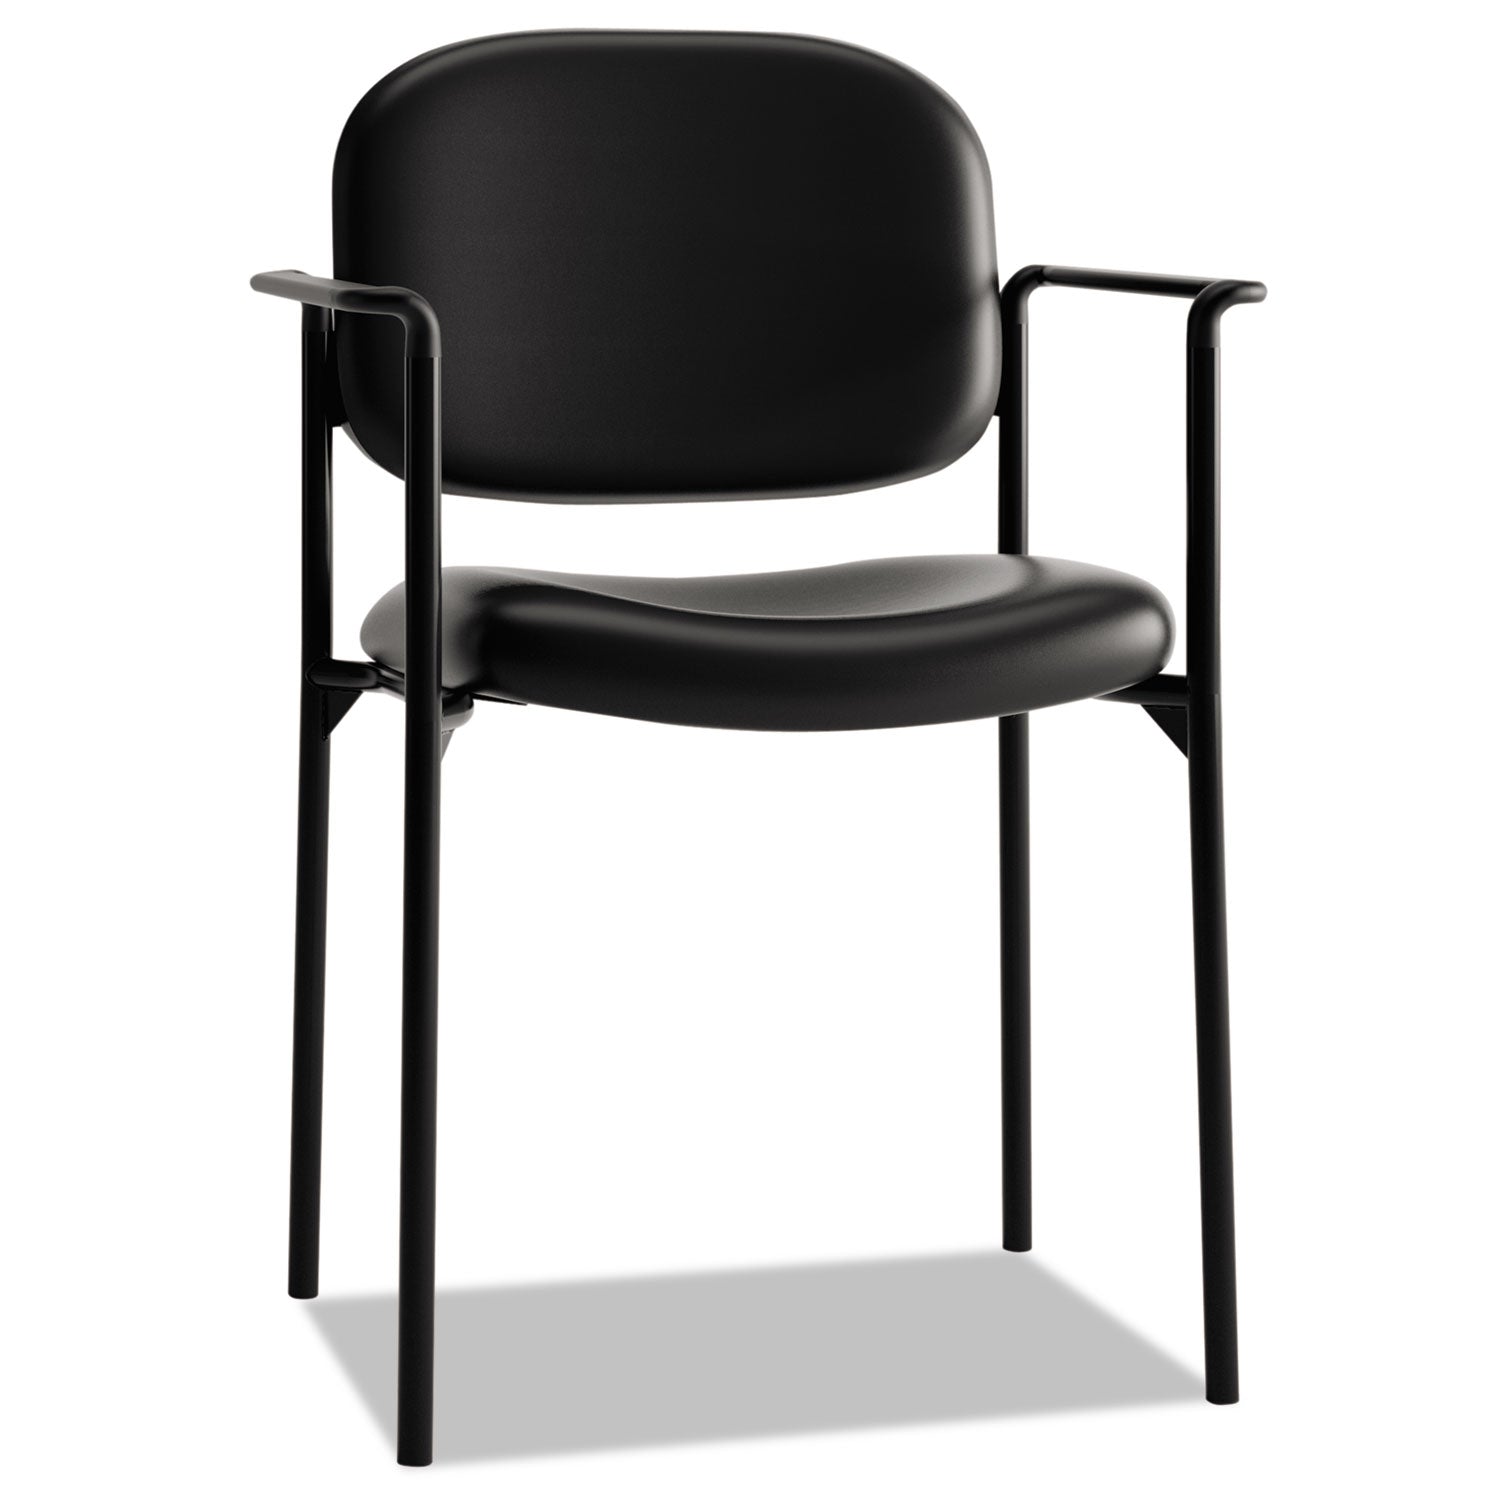 VL616 Stacking Guest Chair with Arms, Bonded Leather Upholstery, 23.25" x 21" x 32.75", Black Seat, Black Back, Black Base - 